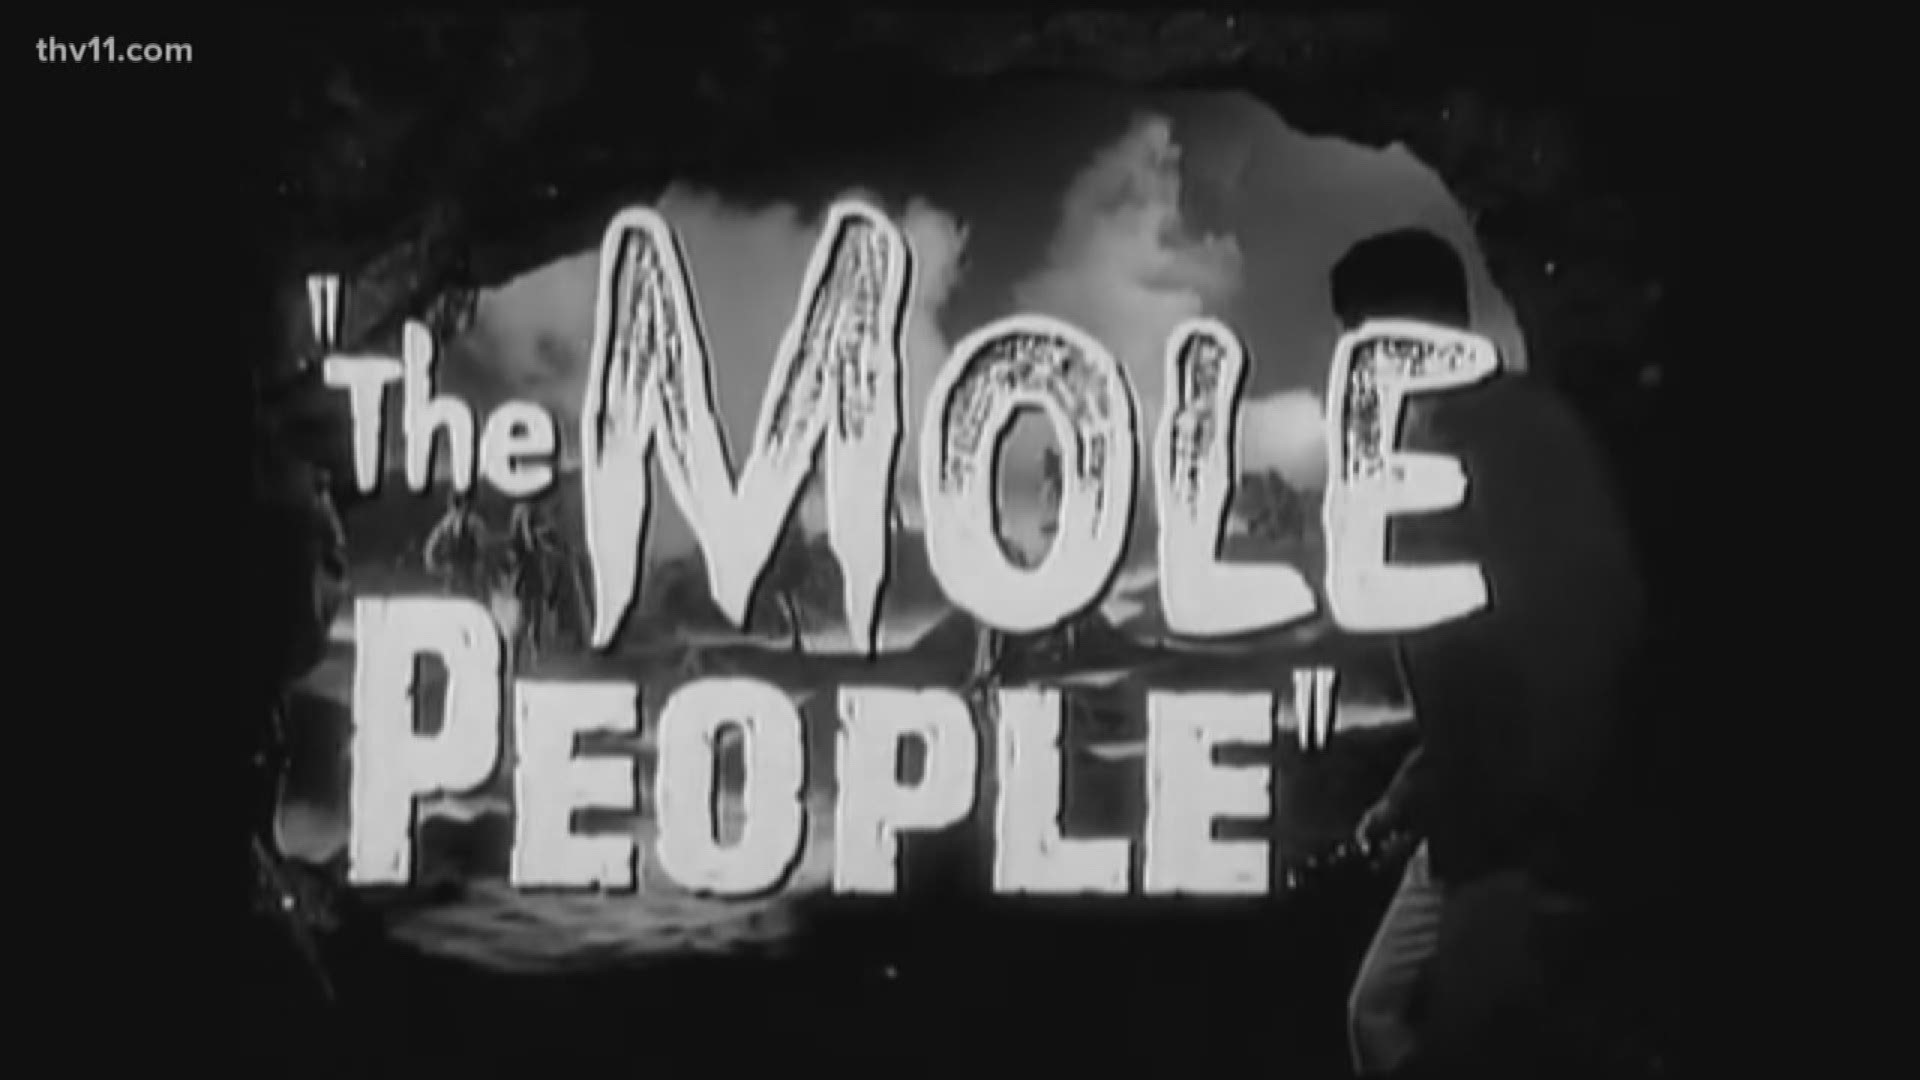 Play bingo to some of the most hilarious movie cliches during a screening of the so-bad-it's-good film, The Mole People.